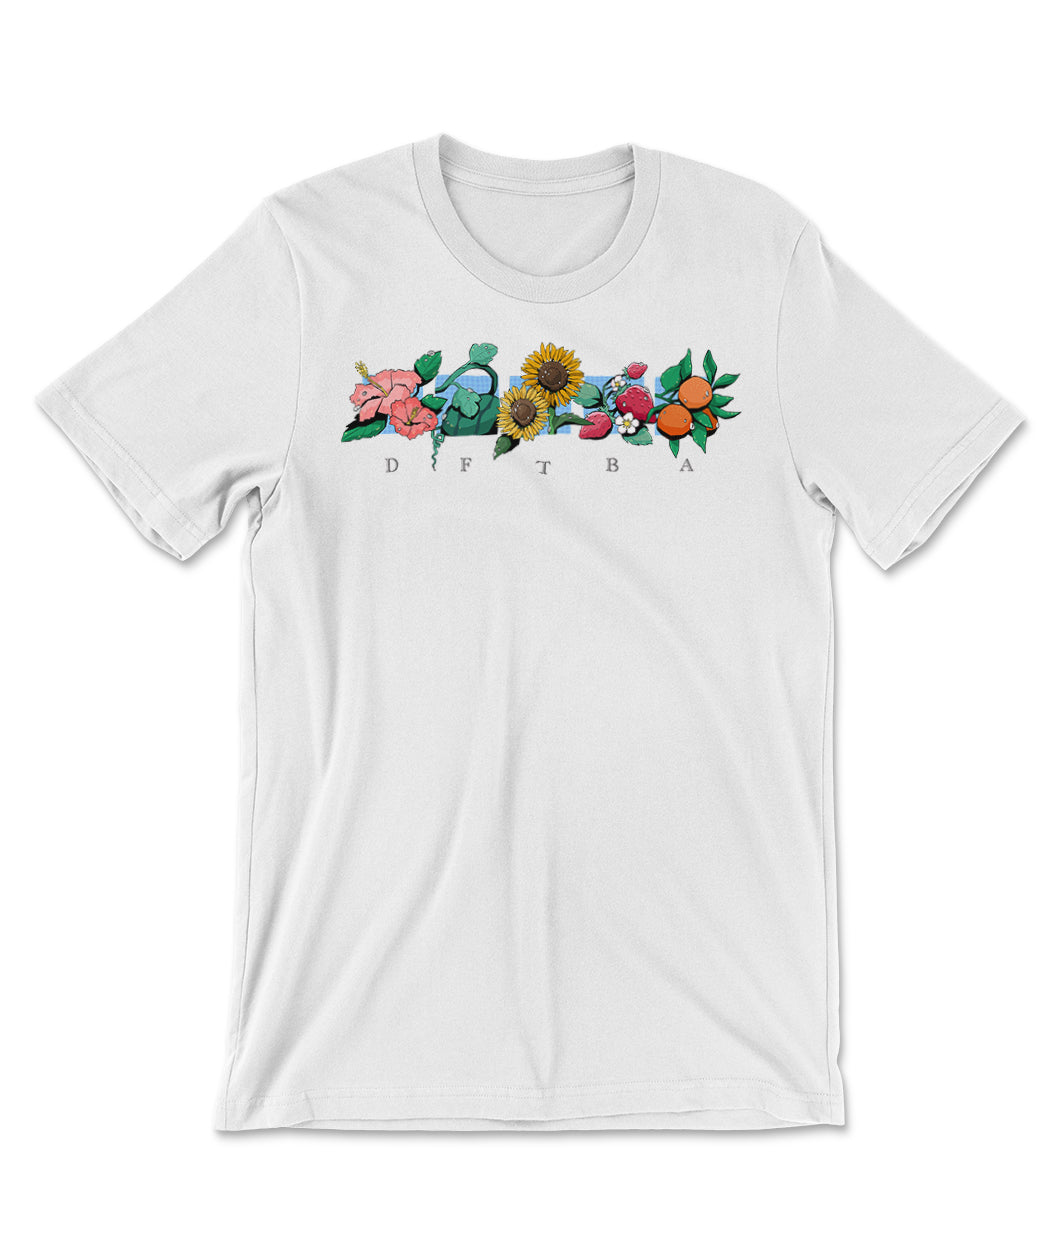 A white t-shirt with a band of colorful, illustrated flowers across the chest with the letters "DFTBA" below. 